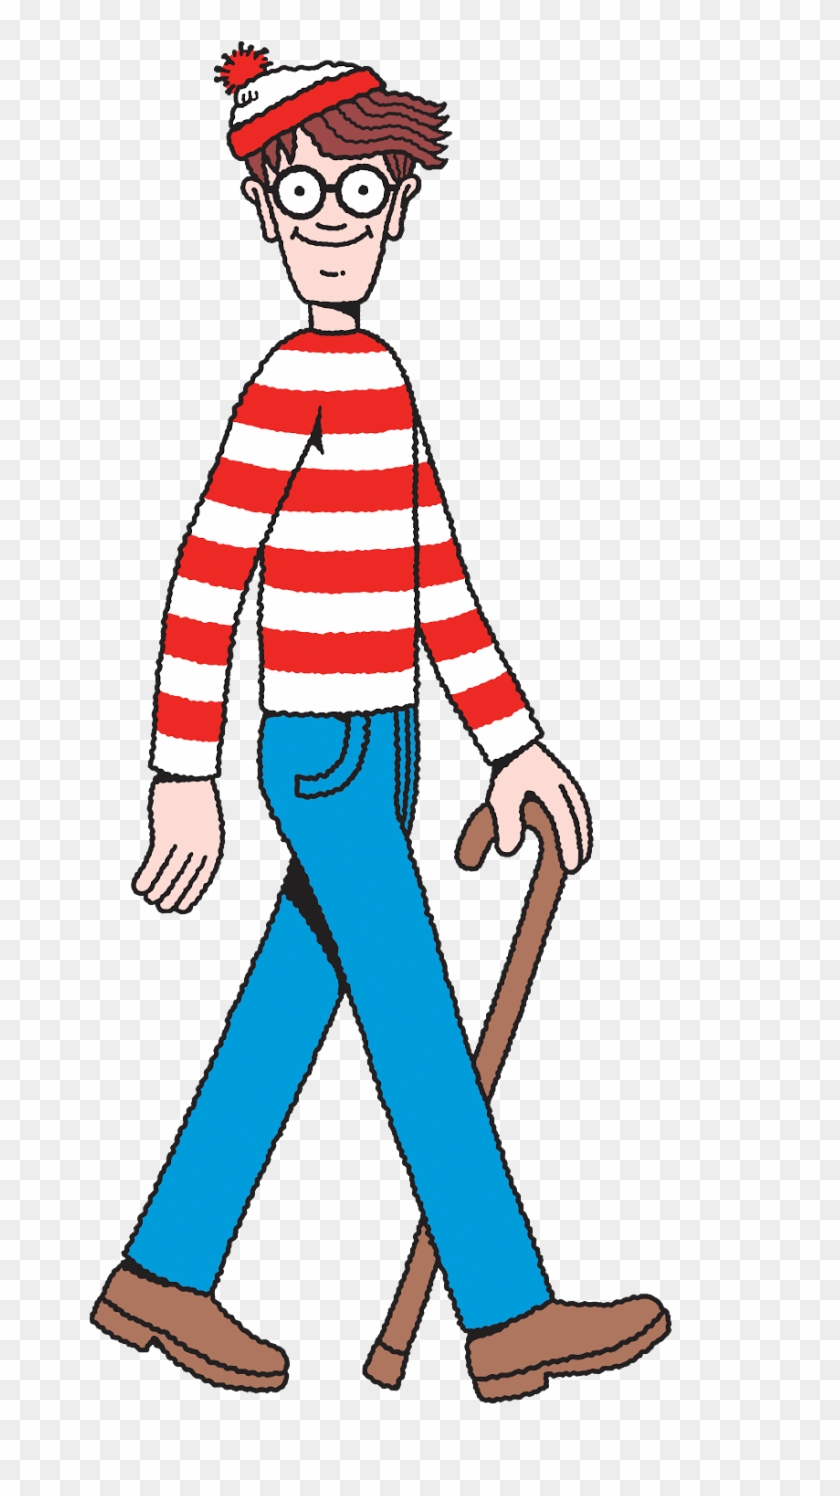 Totally Transparent Transparent Where's Wally/waldo - Where's Waldo Transparent Background Clipart #184577